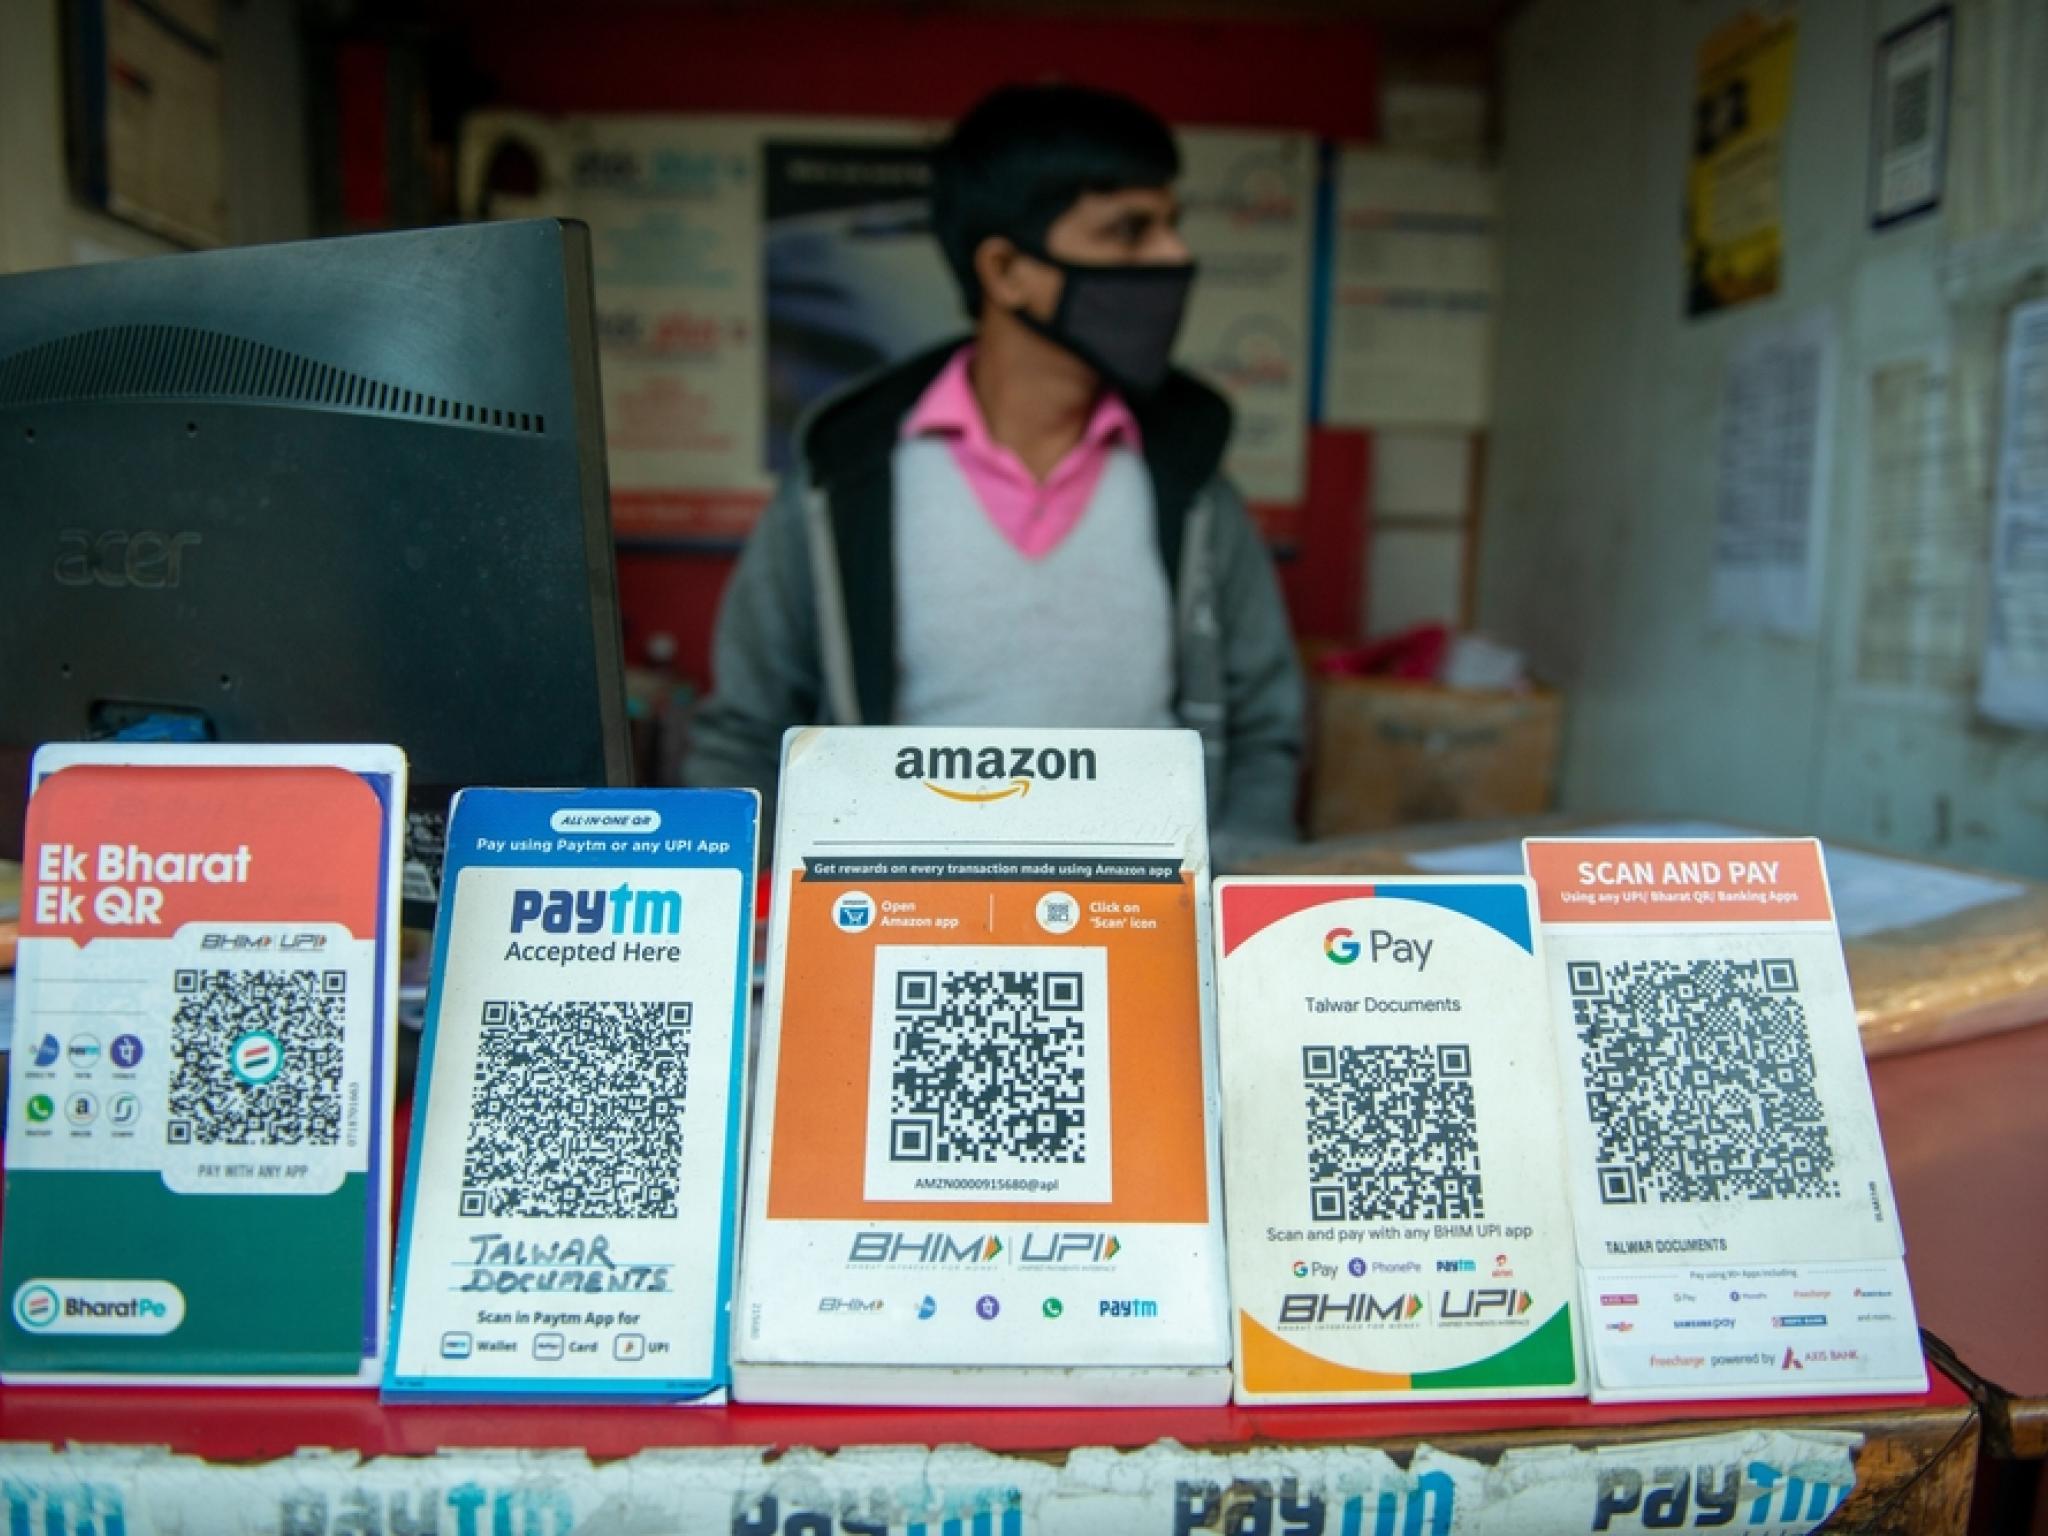  google-amazon-phonepe-are-game-to-try-out-rbis-digital-rupee-report 